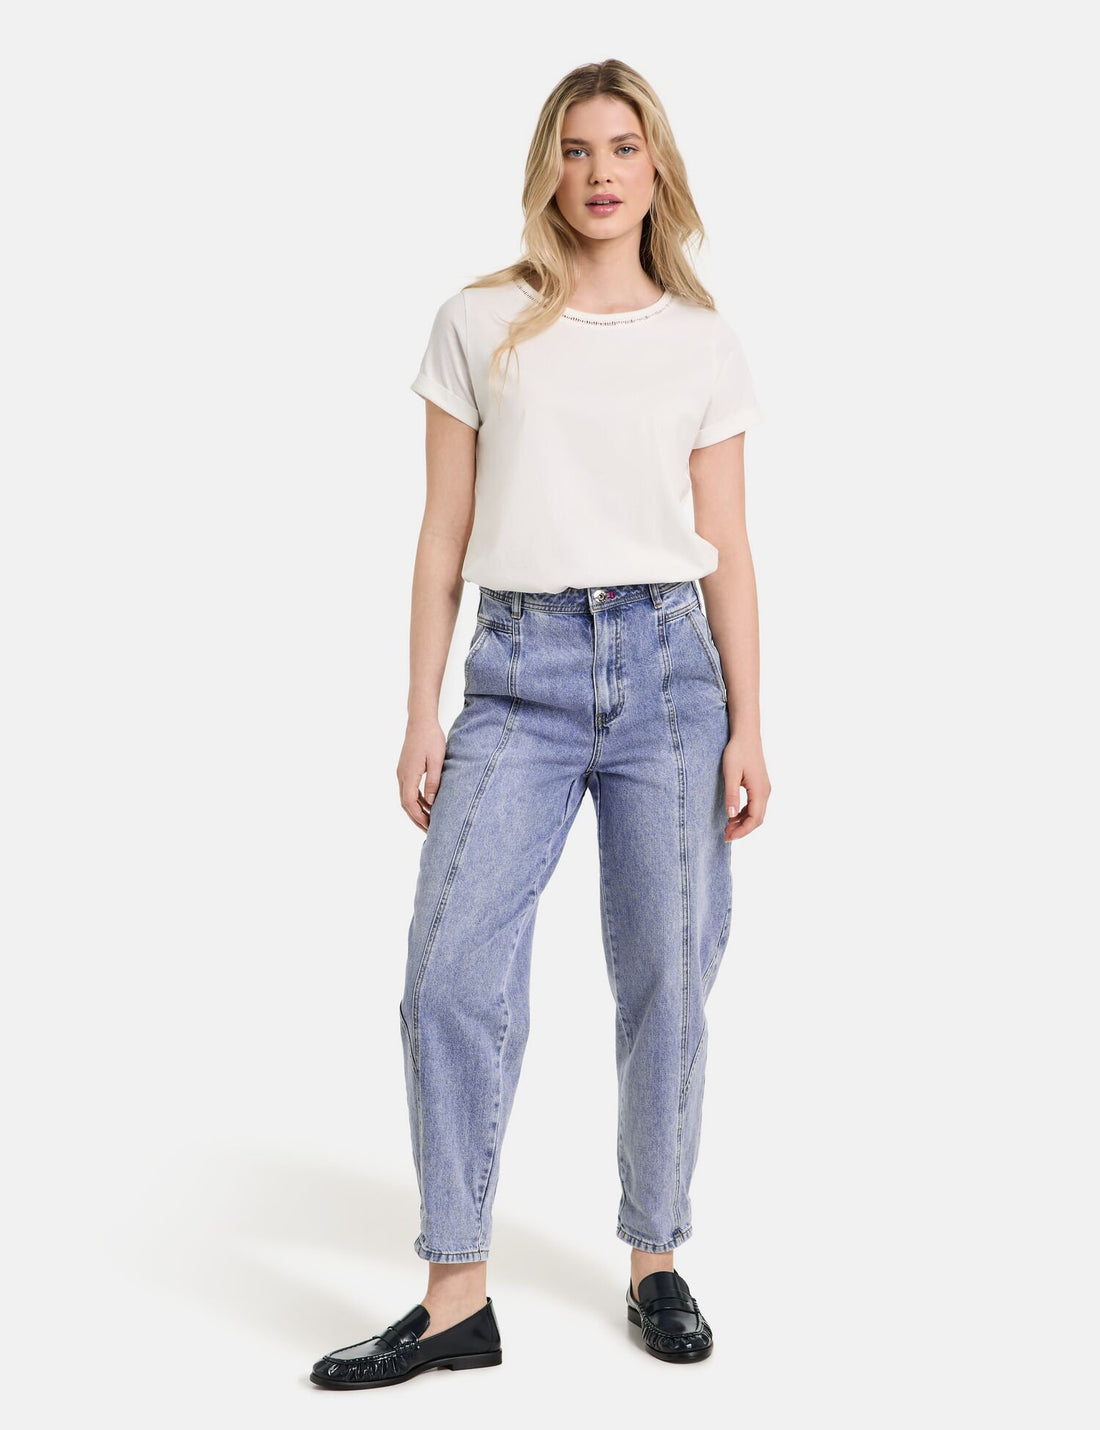 3/4-Length Jeans In A Balloon Fit_520328-11413_8969_01